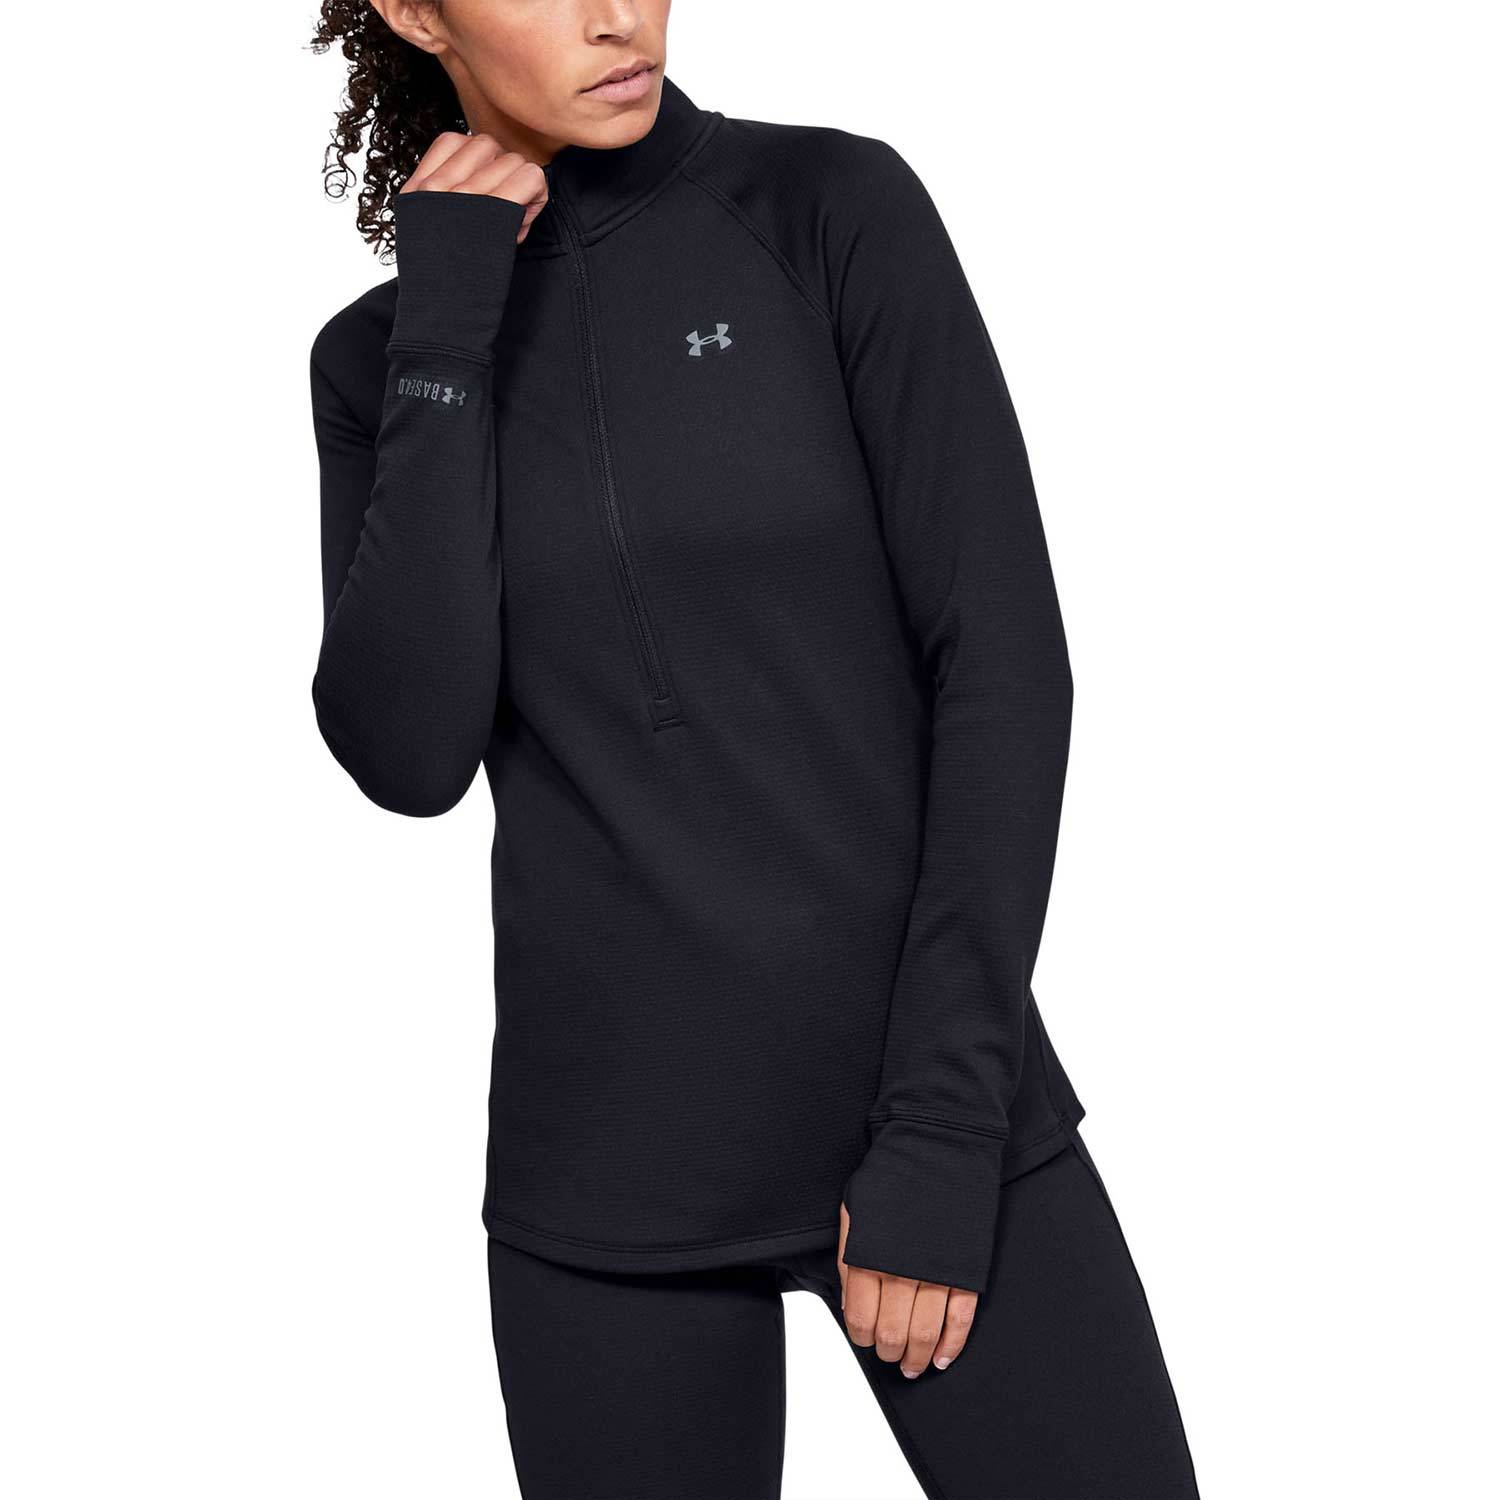 womens under armour zip up